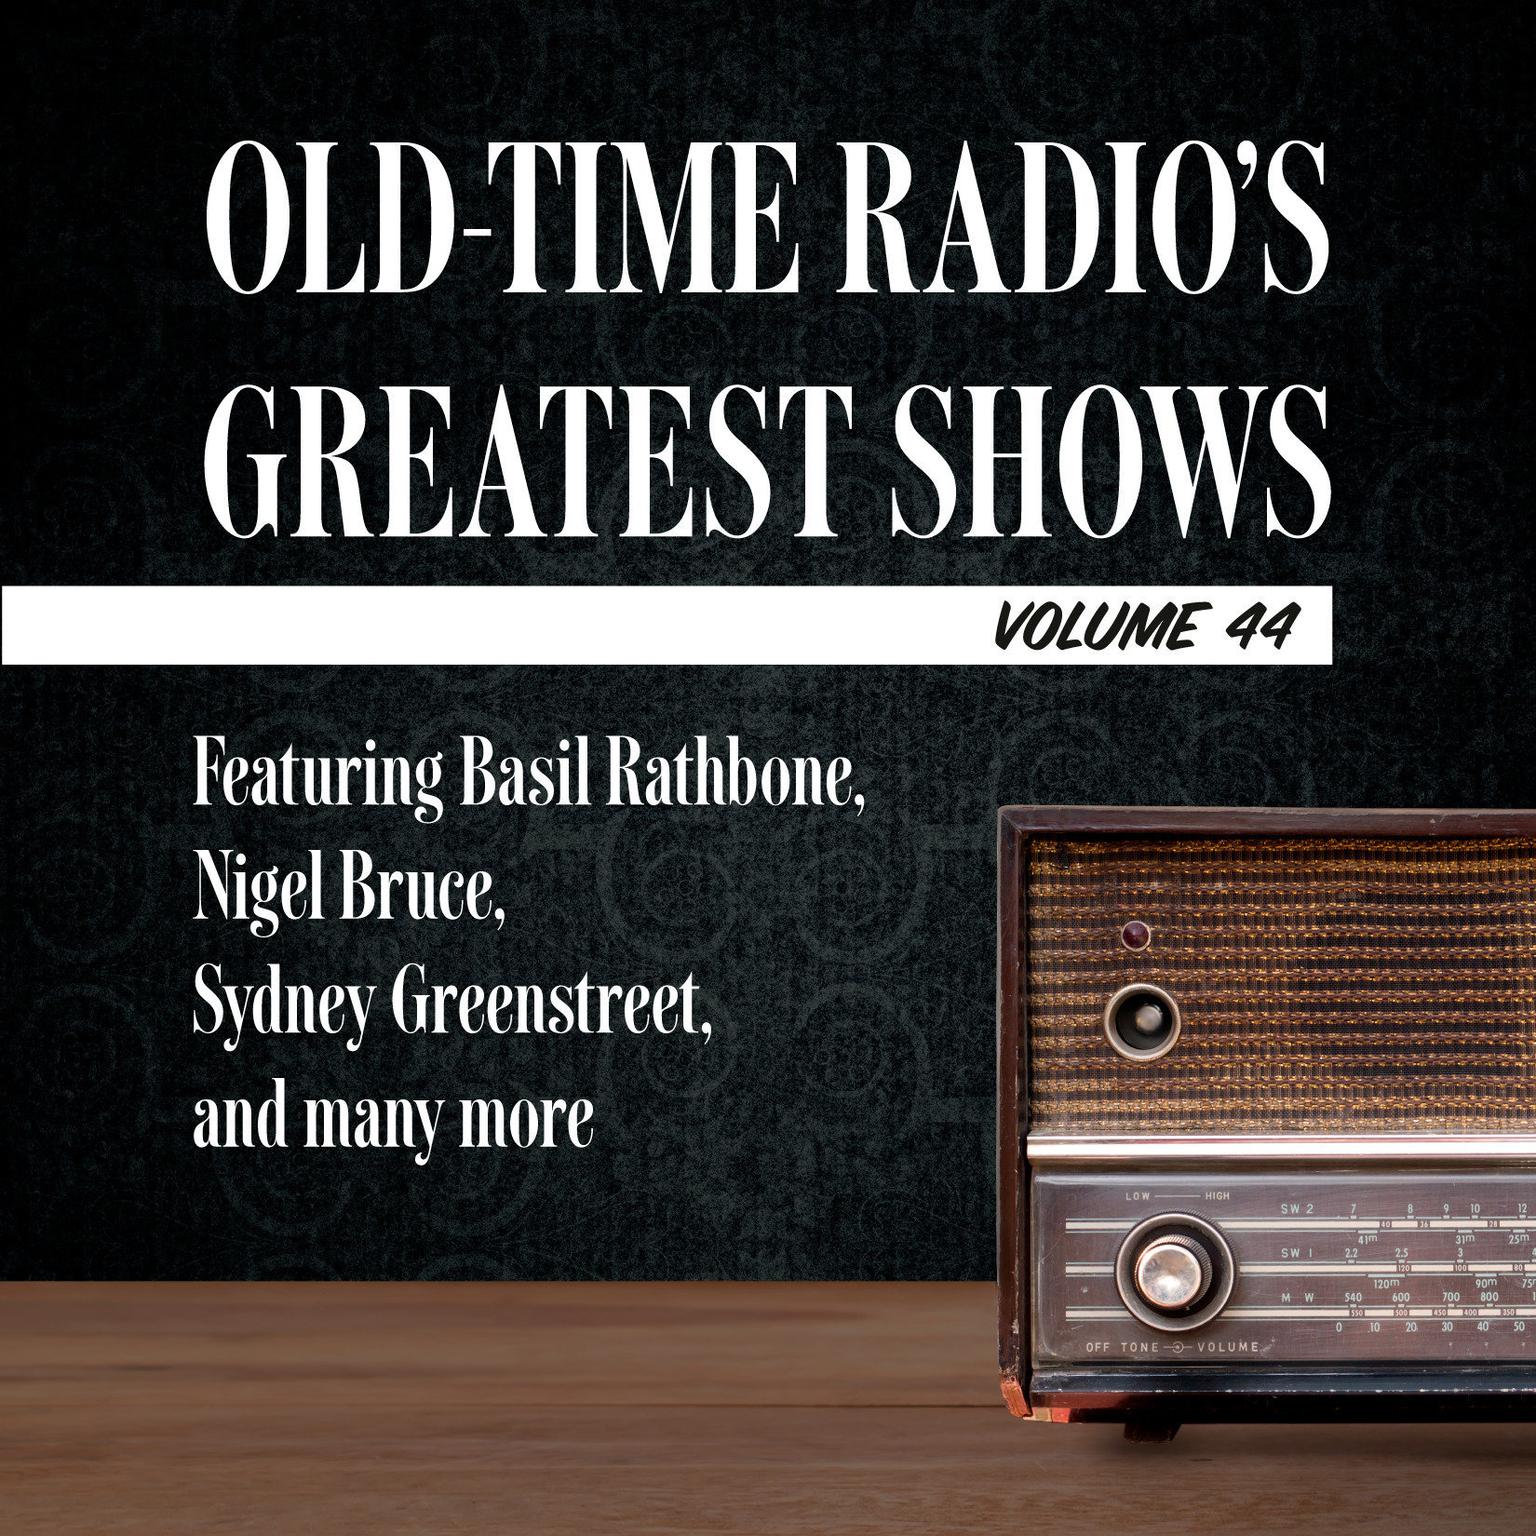 Old-Time Radios Greatest Shows, Volume 44: Featuring Basil Rathbone, Nigel Bruce, Sydney Greenstreet, and many more Audiobook, by Carl Amari